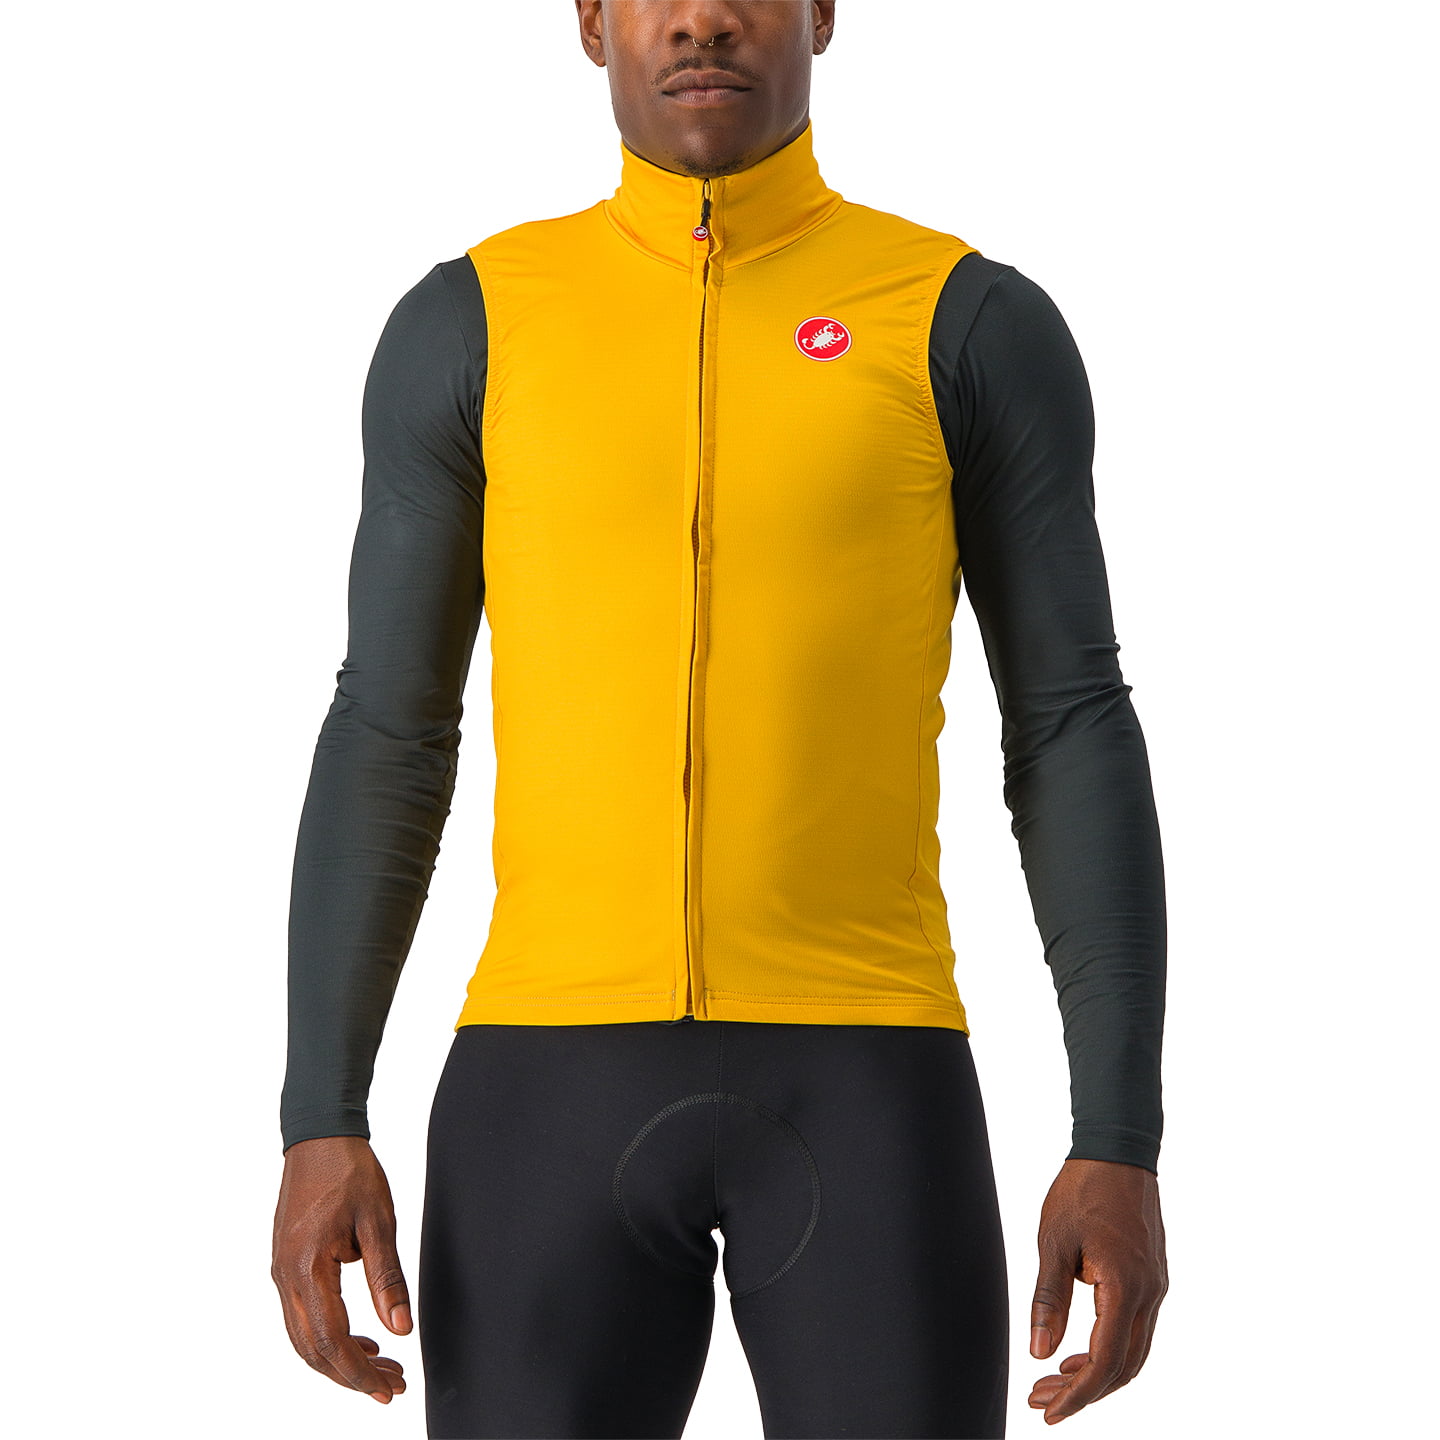 Thermal Pro Mid Thermal Vest Thermal Vest, for men, size M, Cycling vest, Cycle clothing